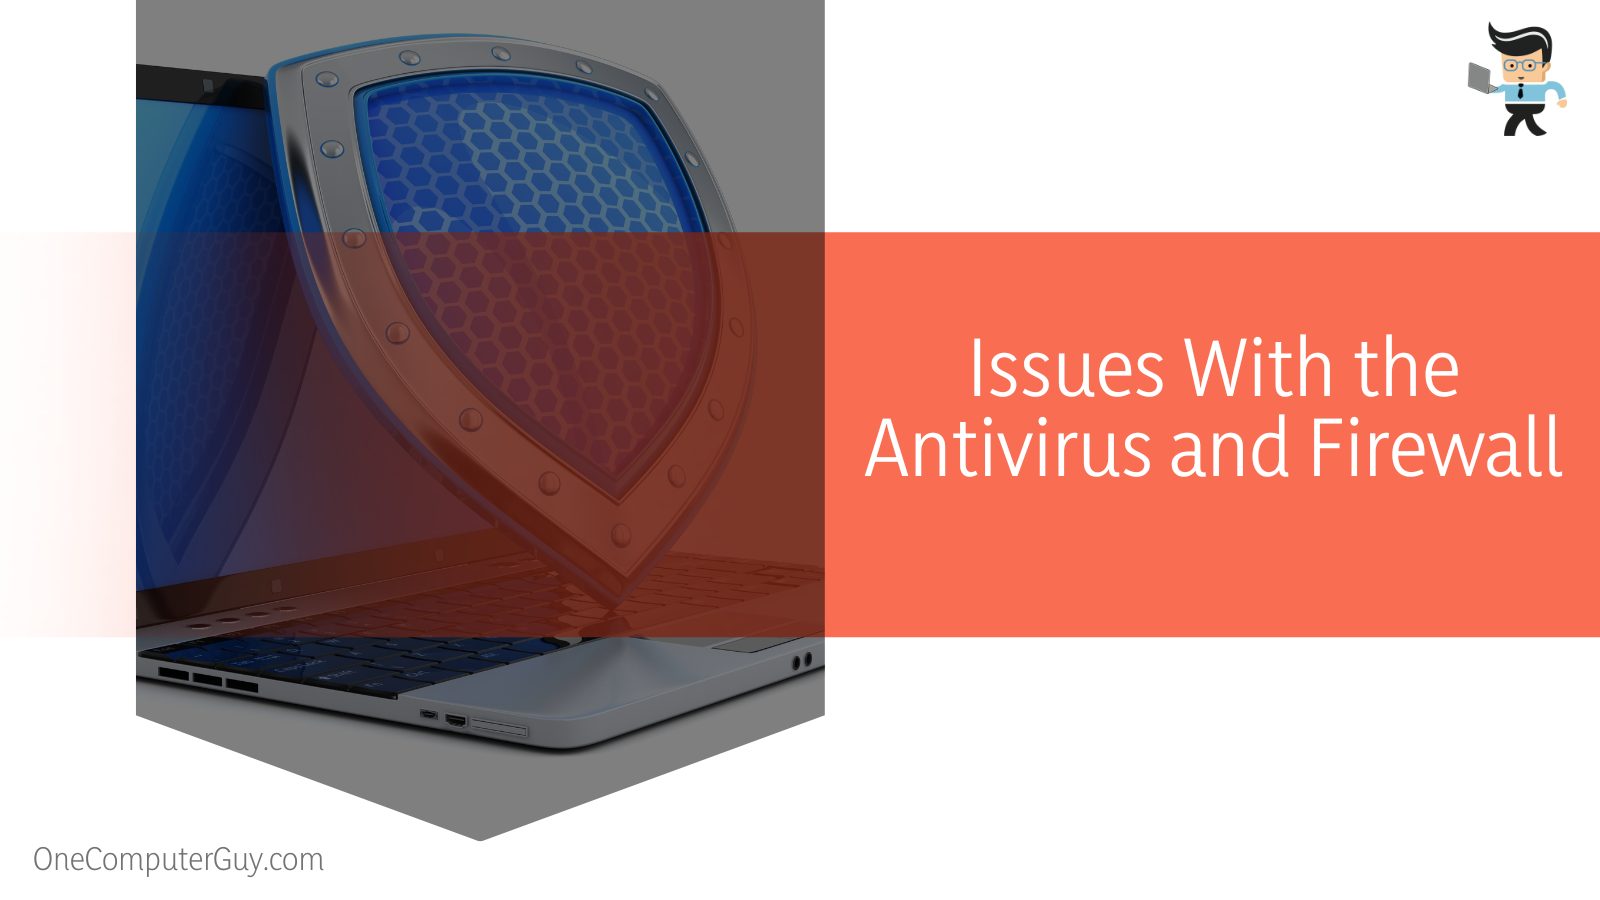 Issues With the Antivirus and Firewall